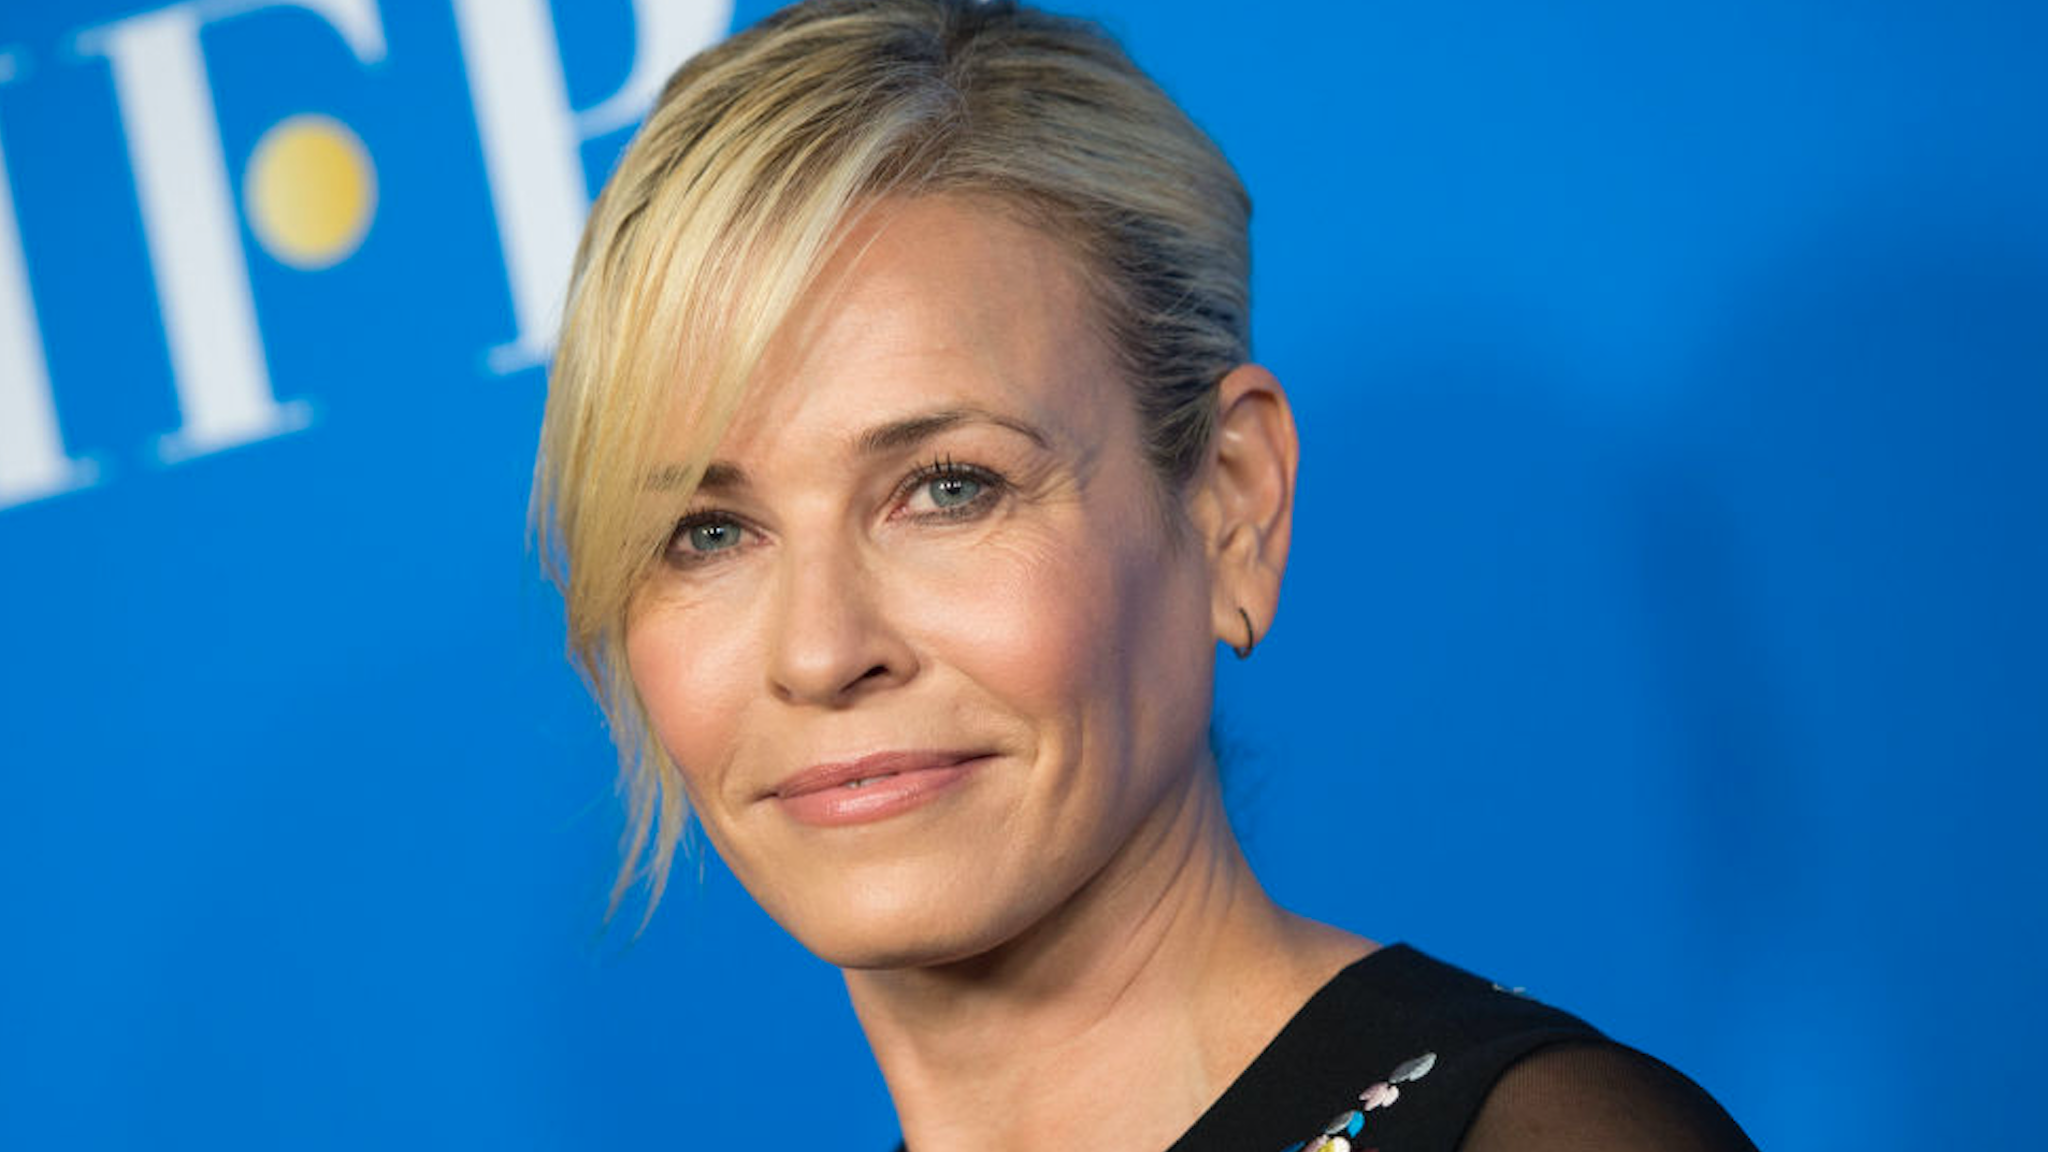 Comedian Chelsea Handler attends The Hollywood Foreign Press Association's Annual Grants Banquet on August 2, 2017 in Beverly Hills, California. / AFP PHOTO / VALERIE MACON